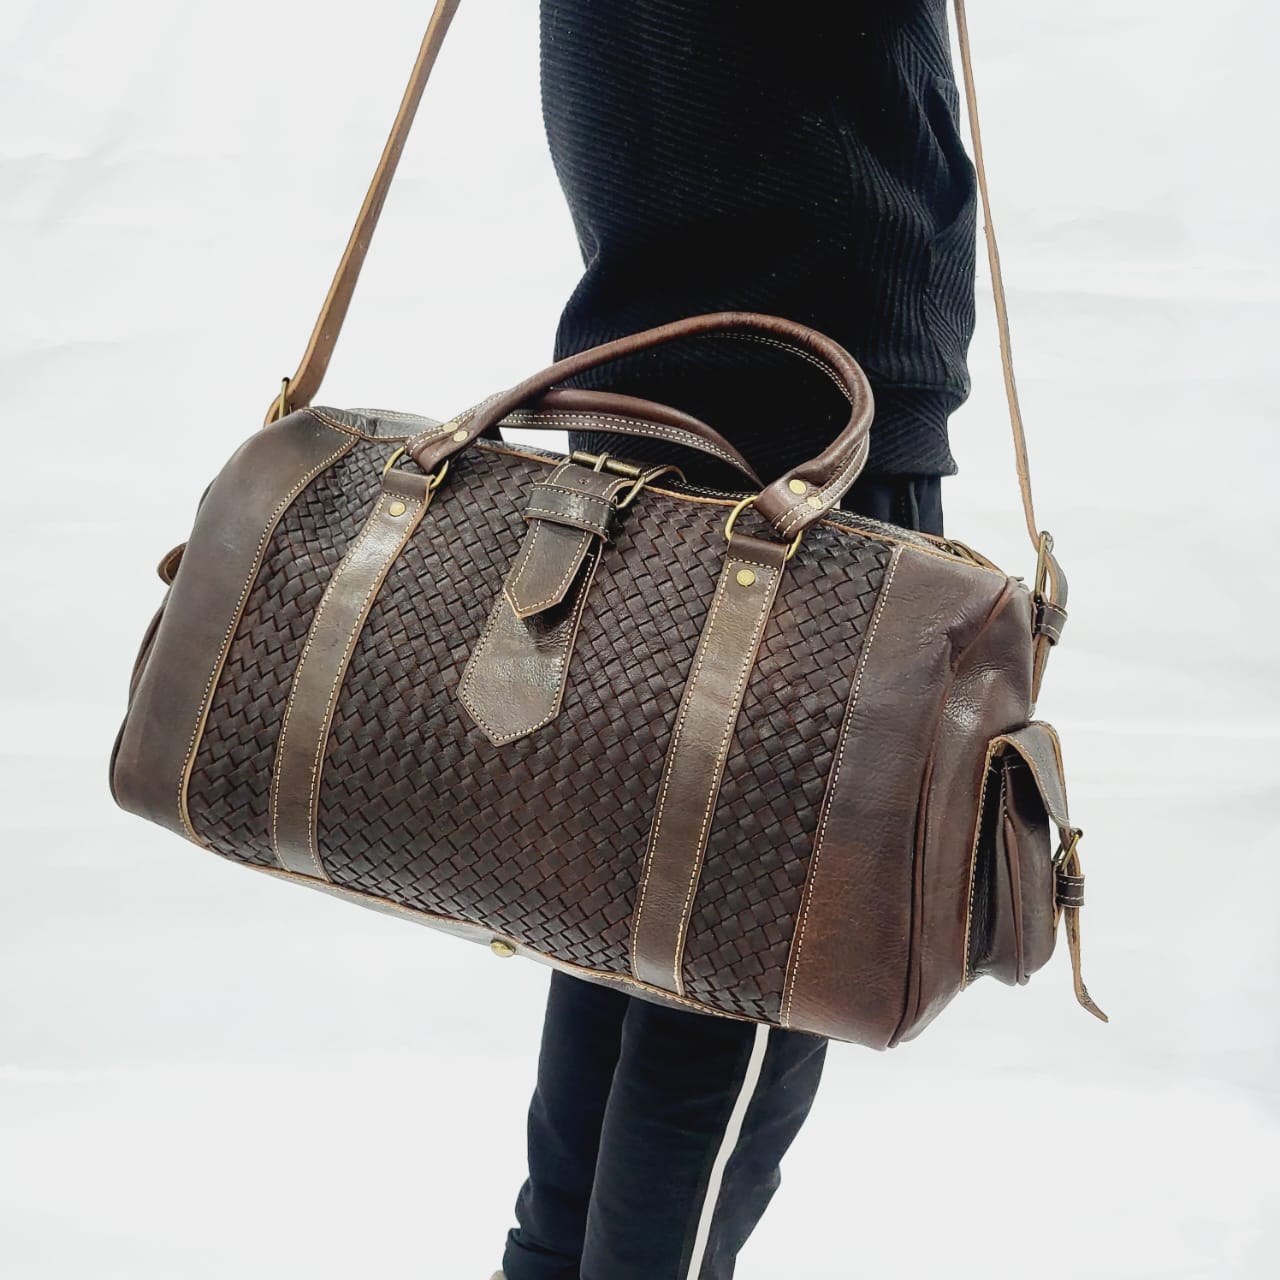 Handcrafted Moroccan Leather Travel Bag